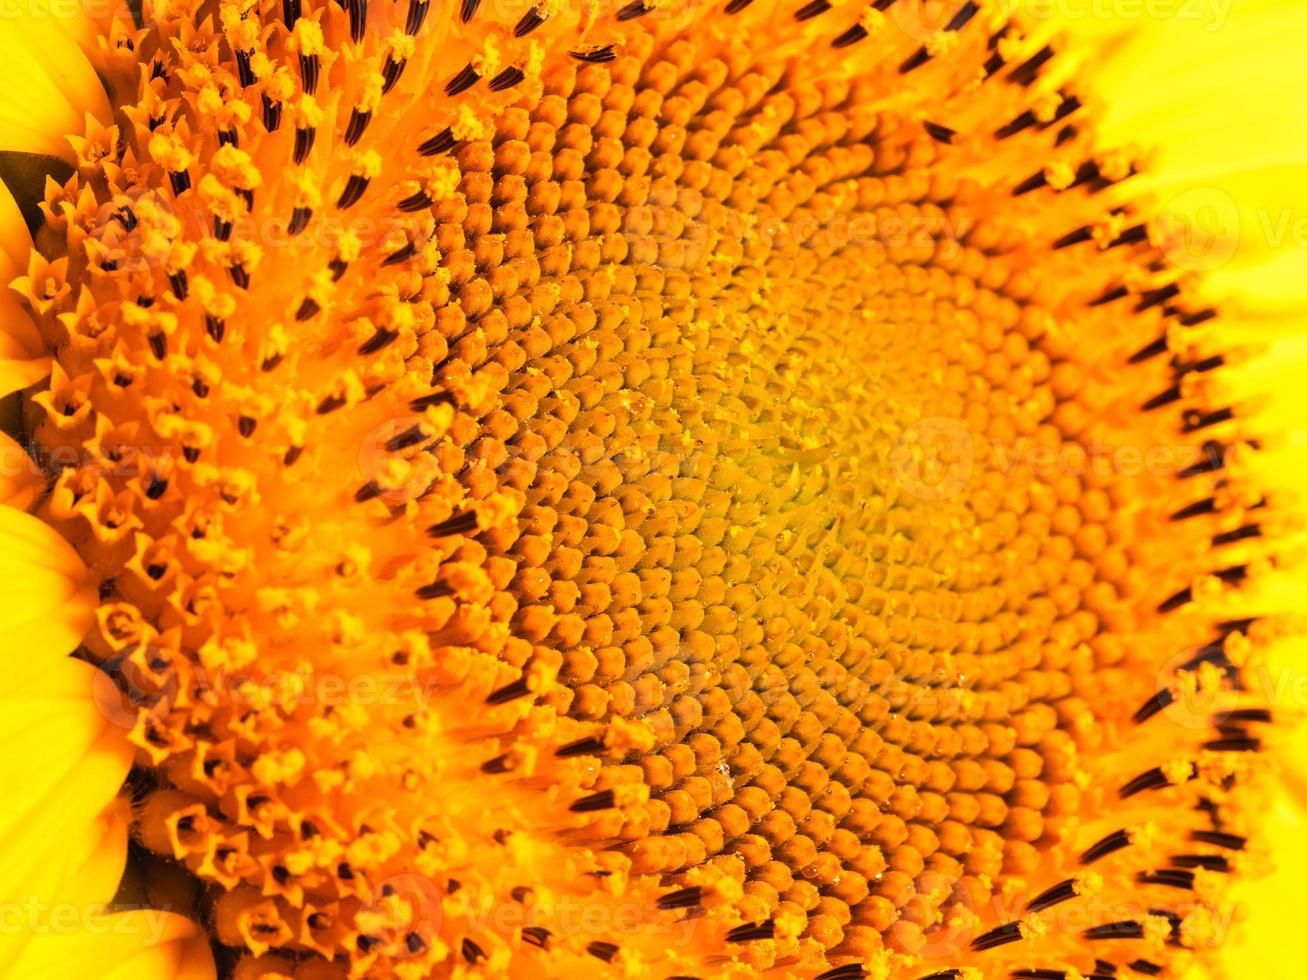 Sunflower a lot of macro detail, flower and seeds photo